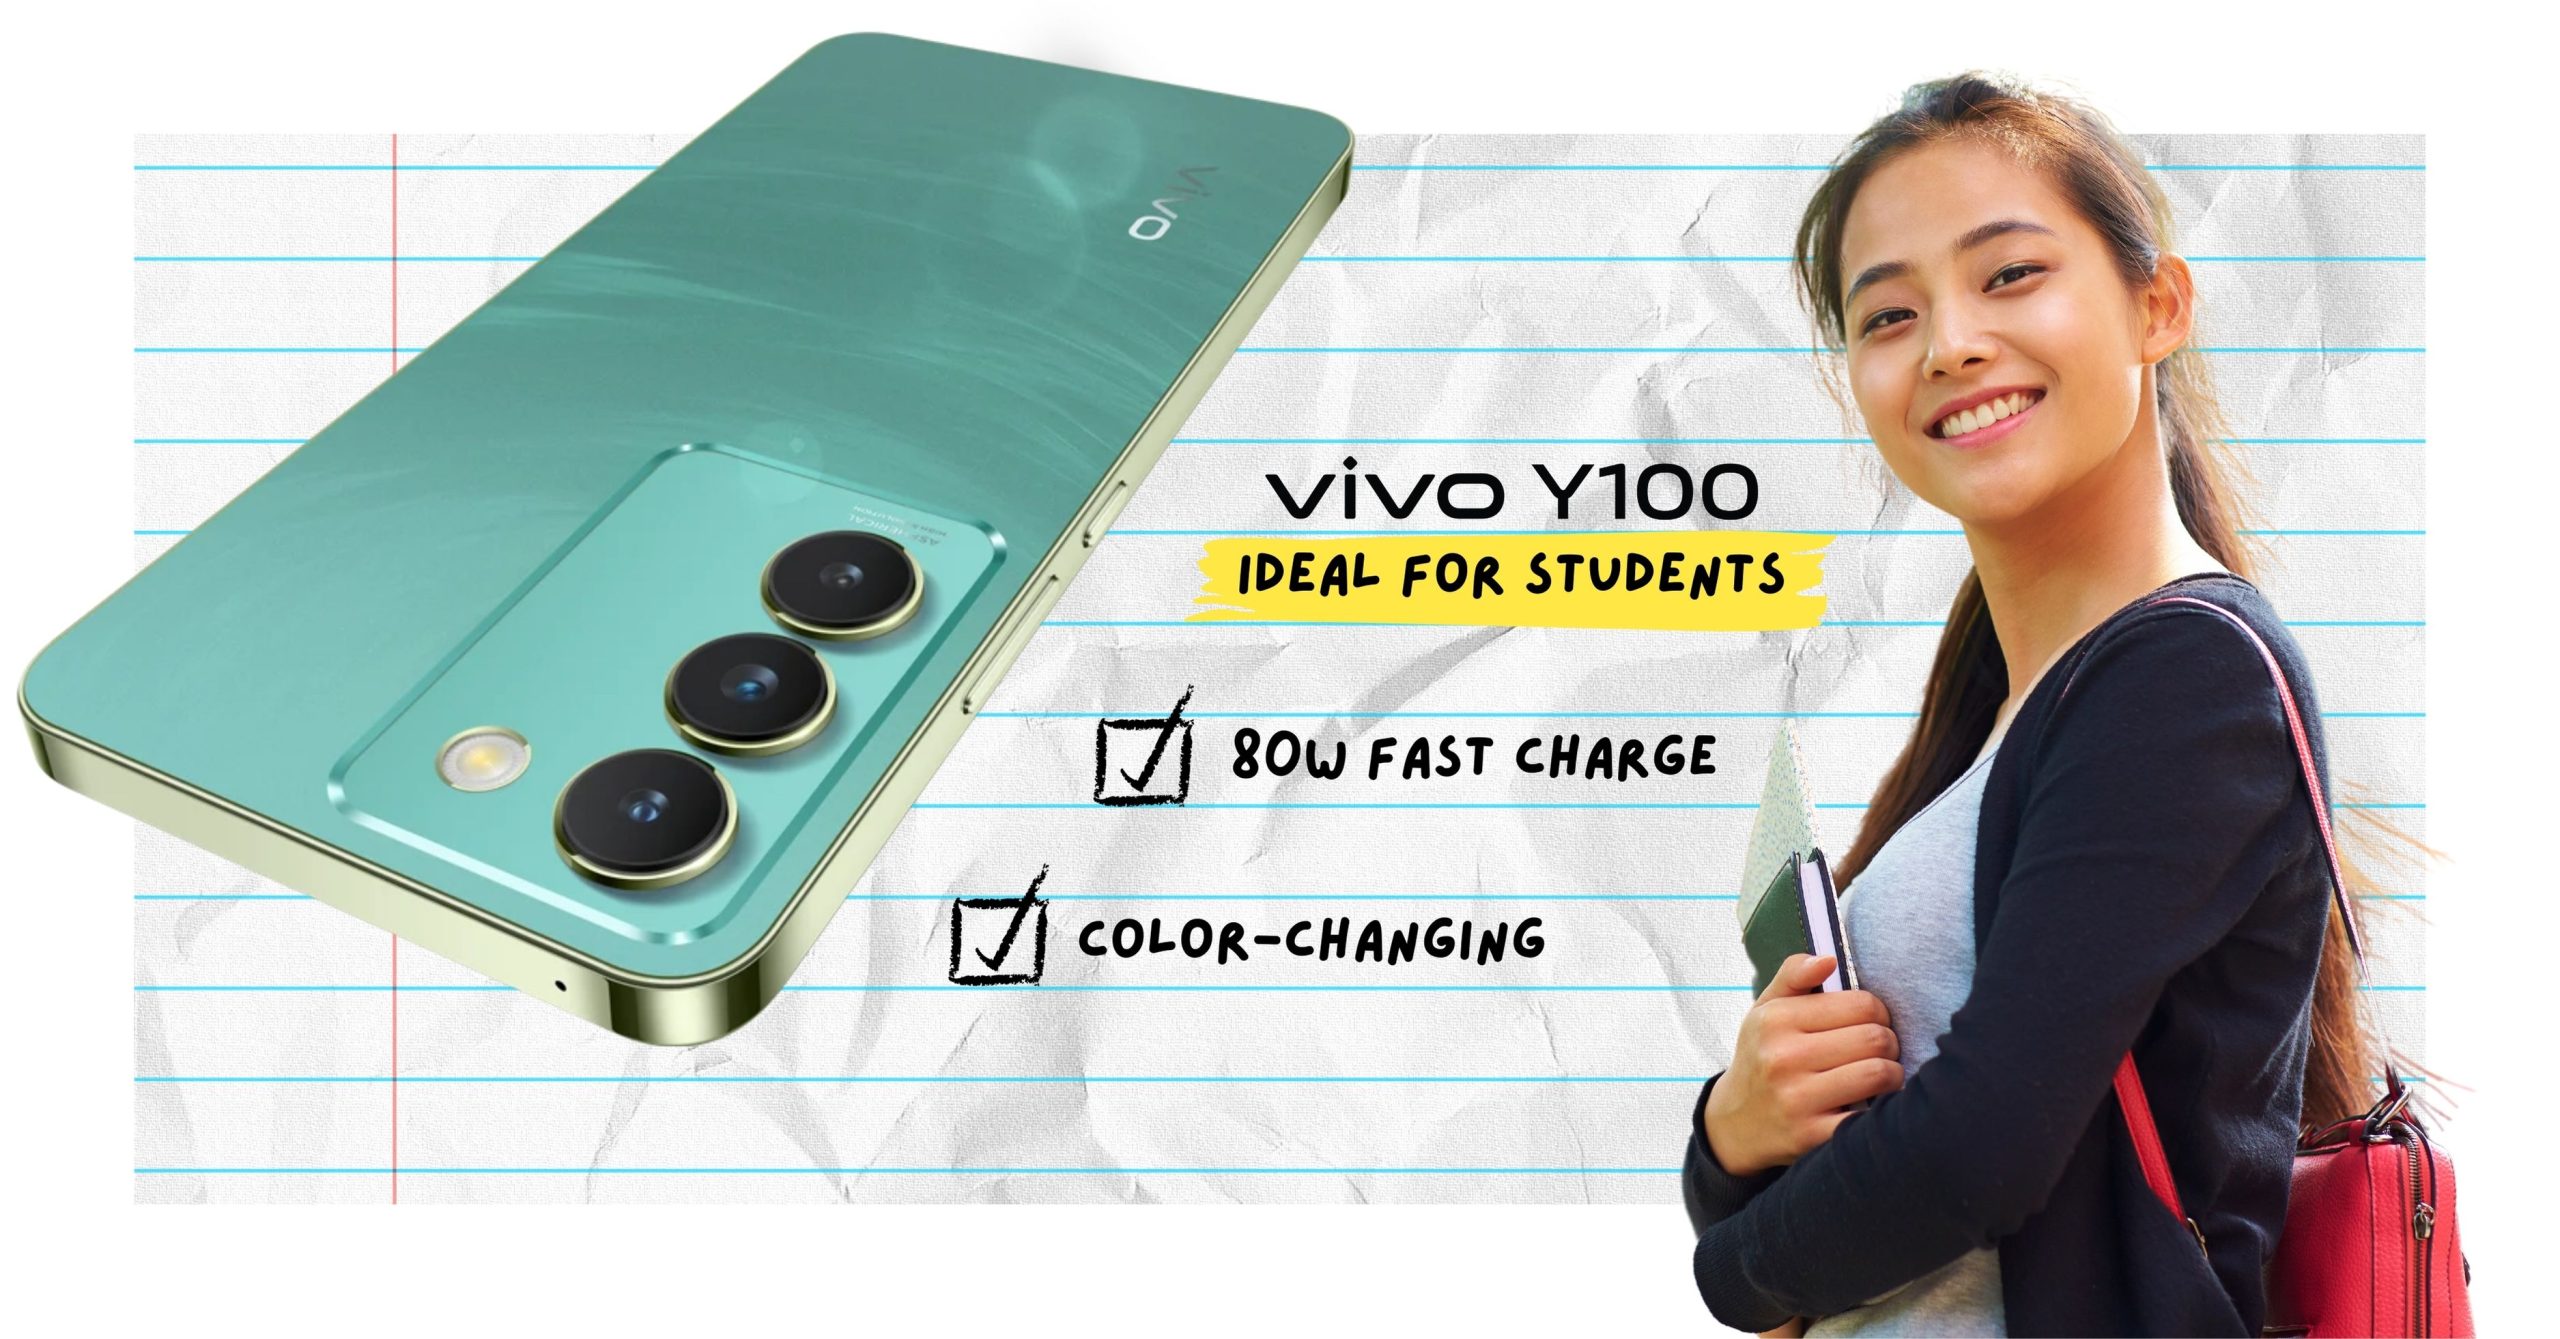 vivo Y100 for students scaled